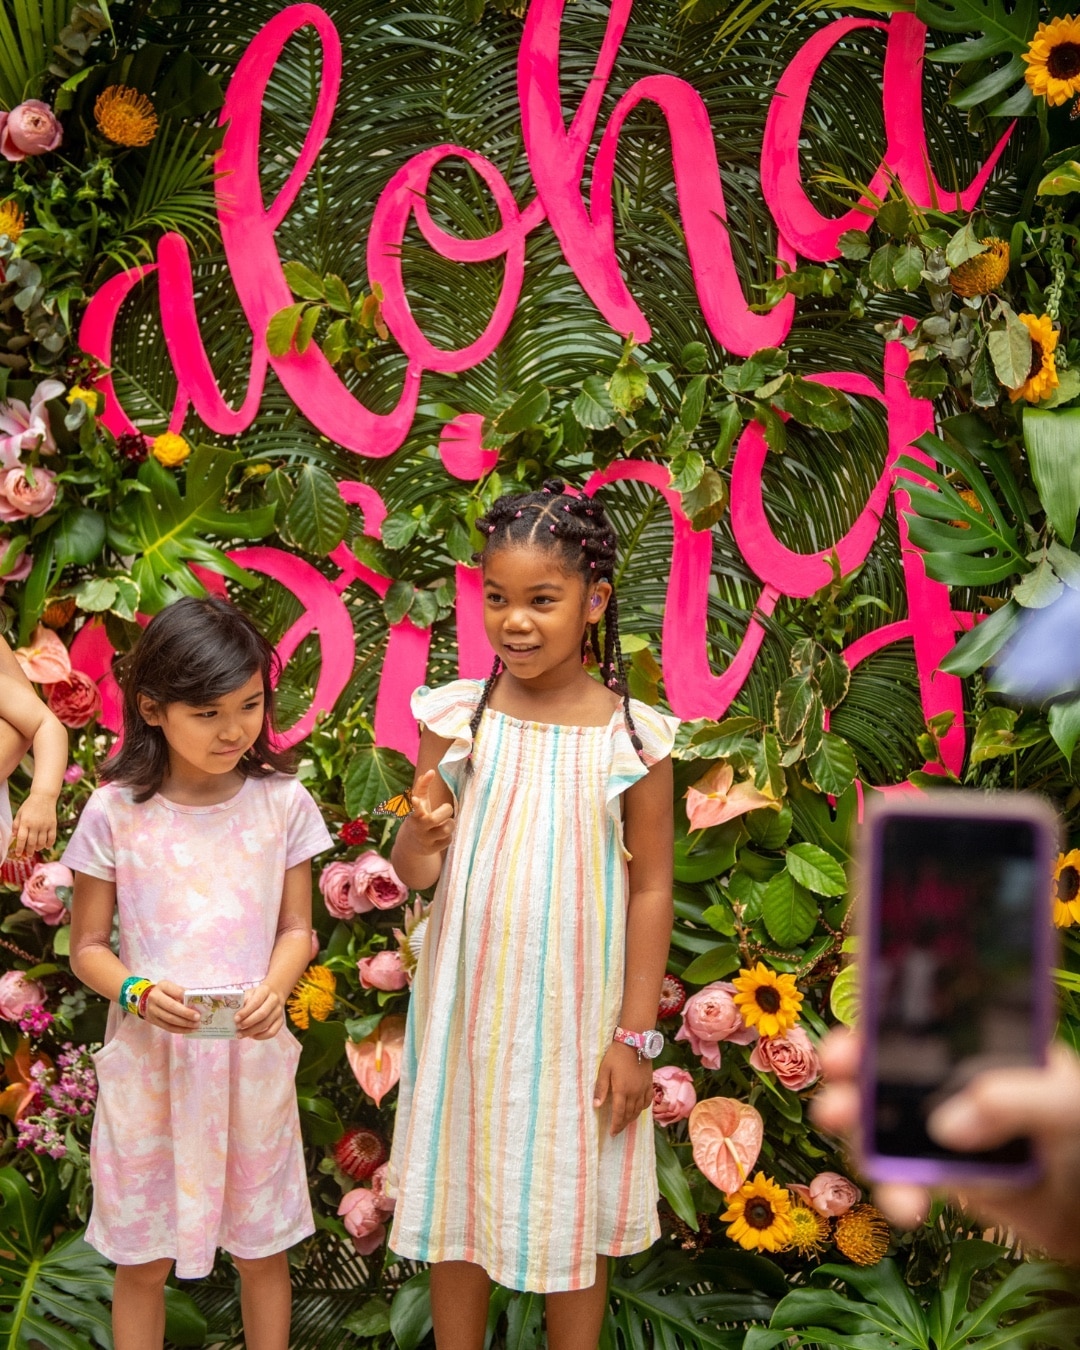 Aloha Spring! You’re invited to our First Day of Spring celebration on Sunday, March 19 at the South Shore Market Courtyard. From 1pm – 3pm, enjoy a Monarch butterfly interactive experience, take photos at our floral backdrop, sample iced tea and treats from @coffeebeanhi, and get artsy at a keiki coloring station, while supplies last. #wardvillage